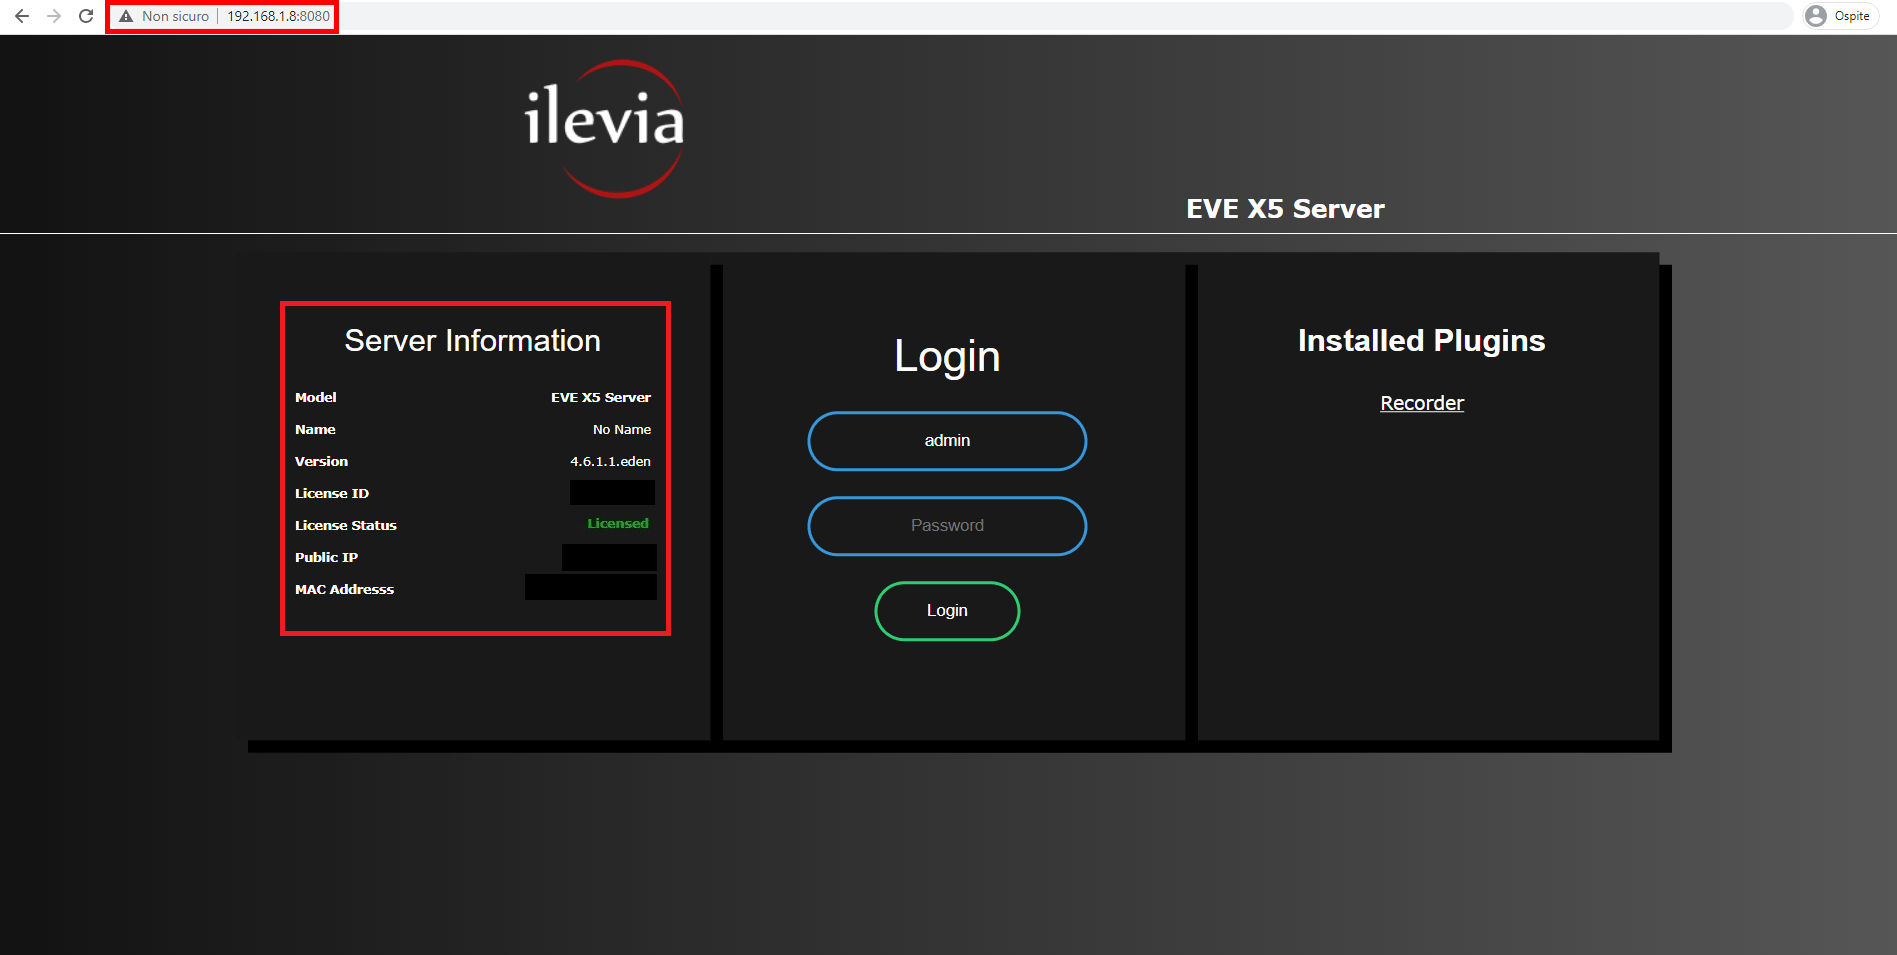 How to connect into the Web interface of the EVE server in the network of the Home automation virtual machine EVE X5 device